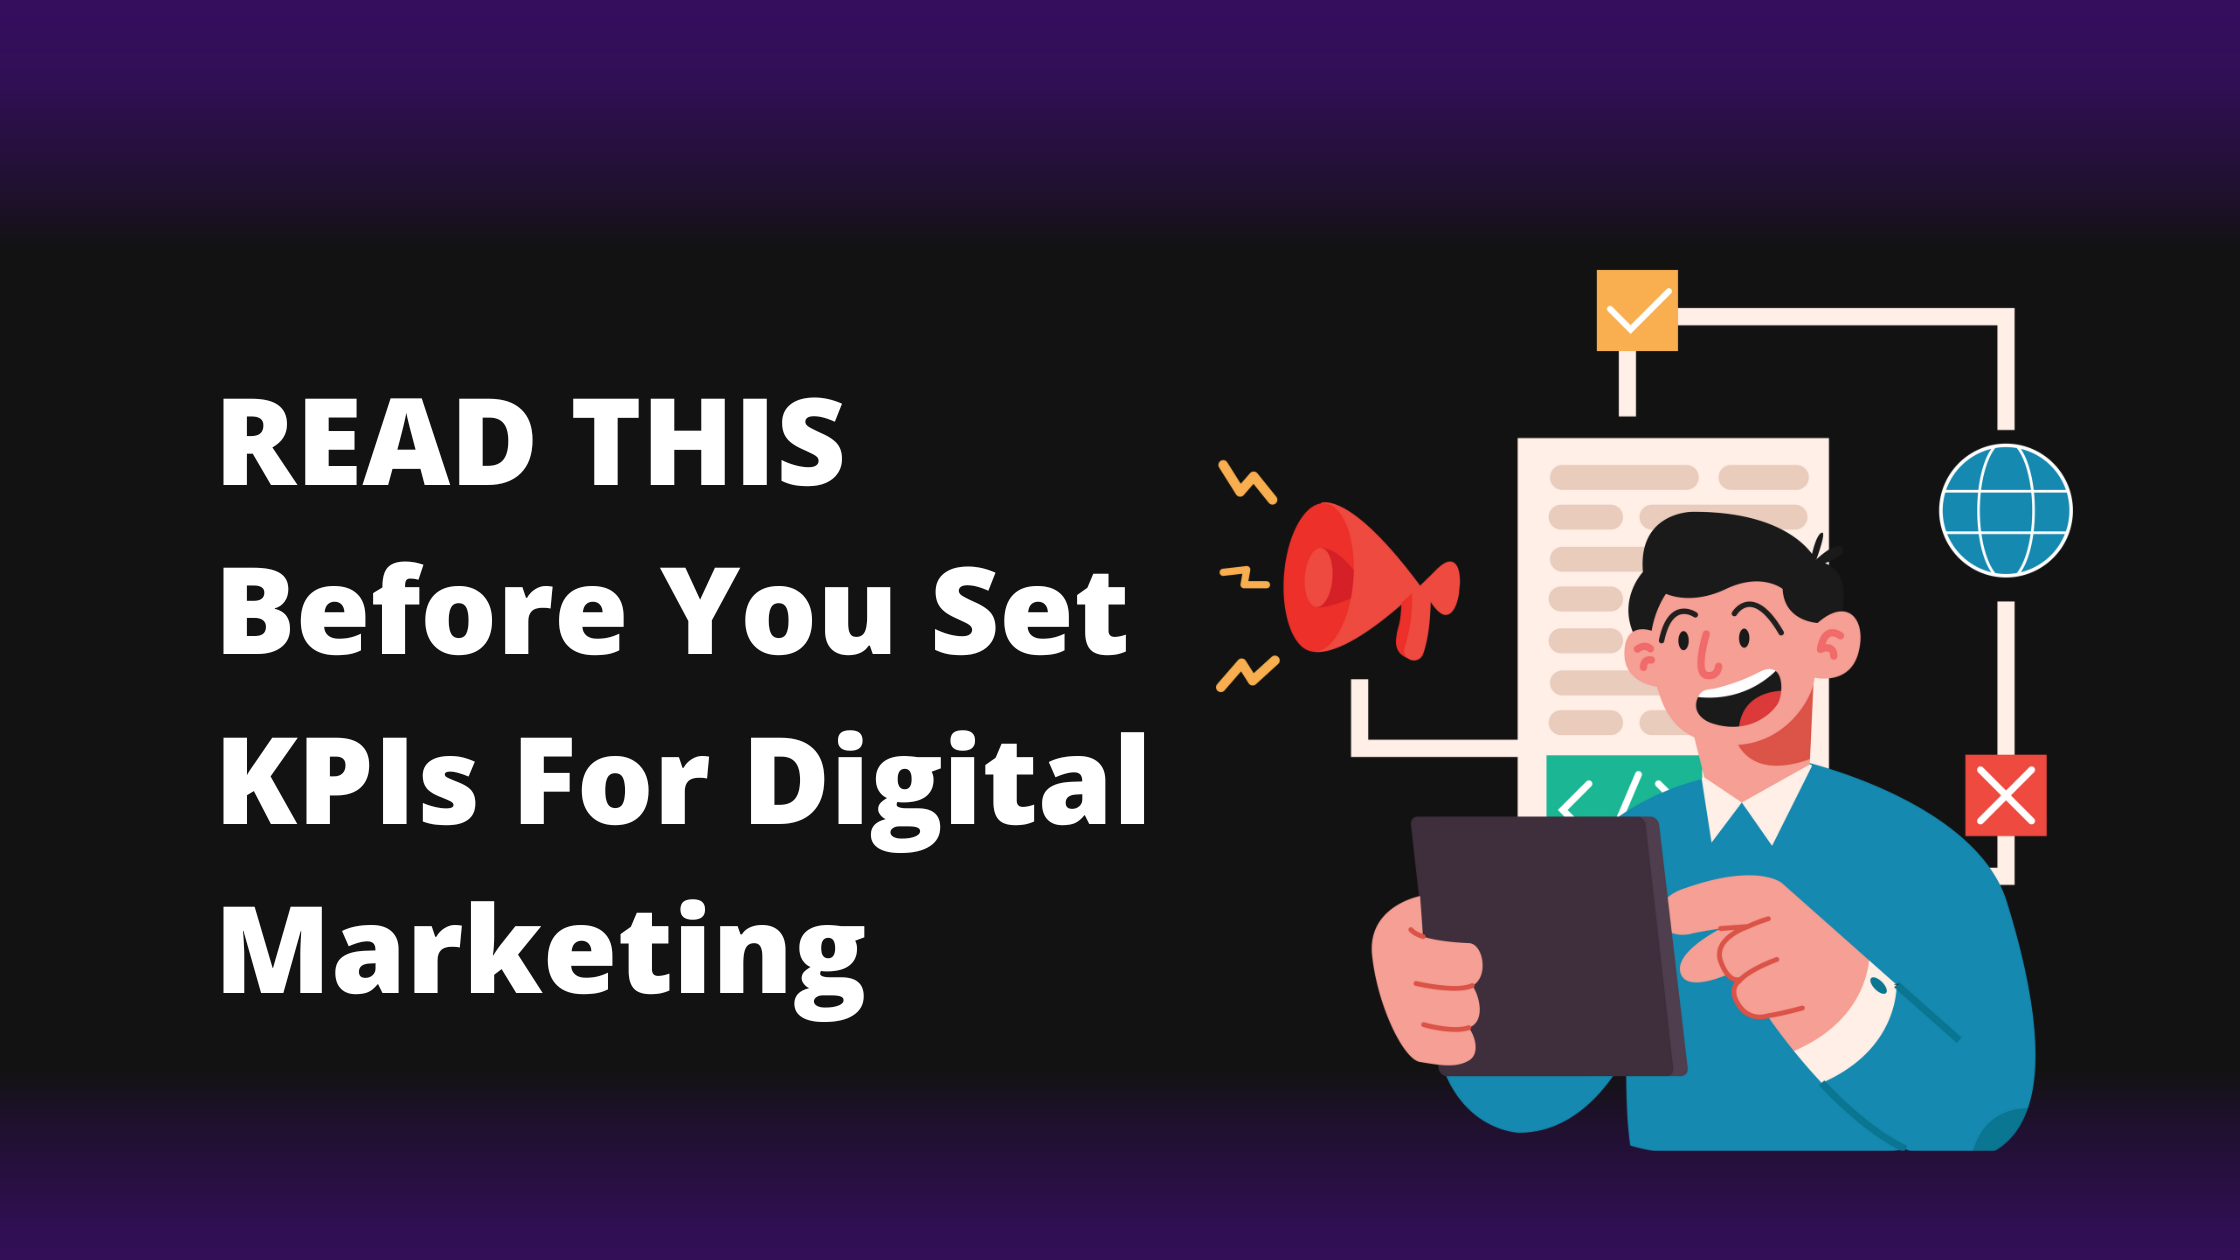 Read This Before You Set KPIs For Digital Marketing